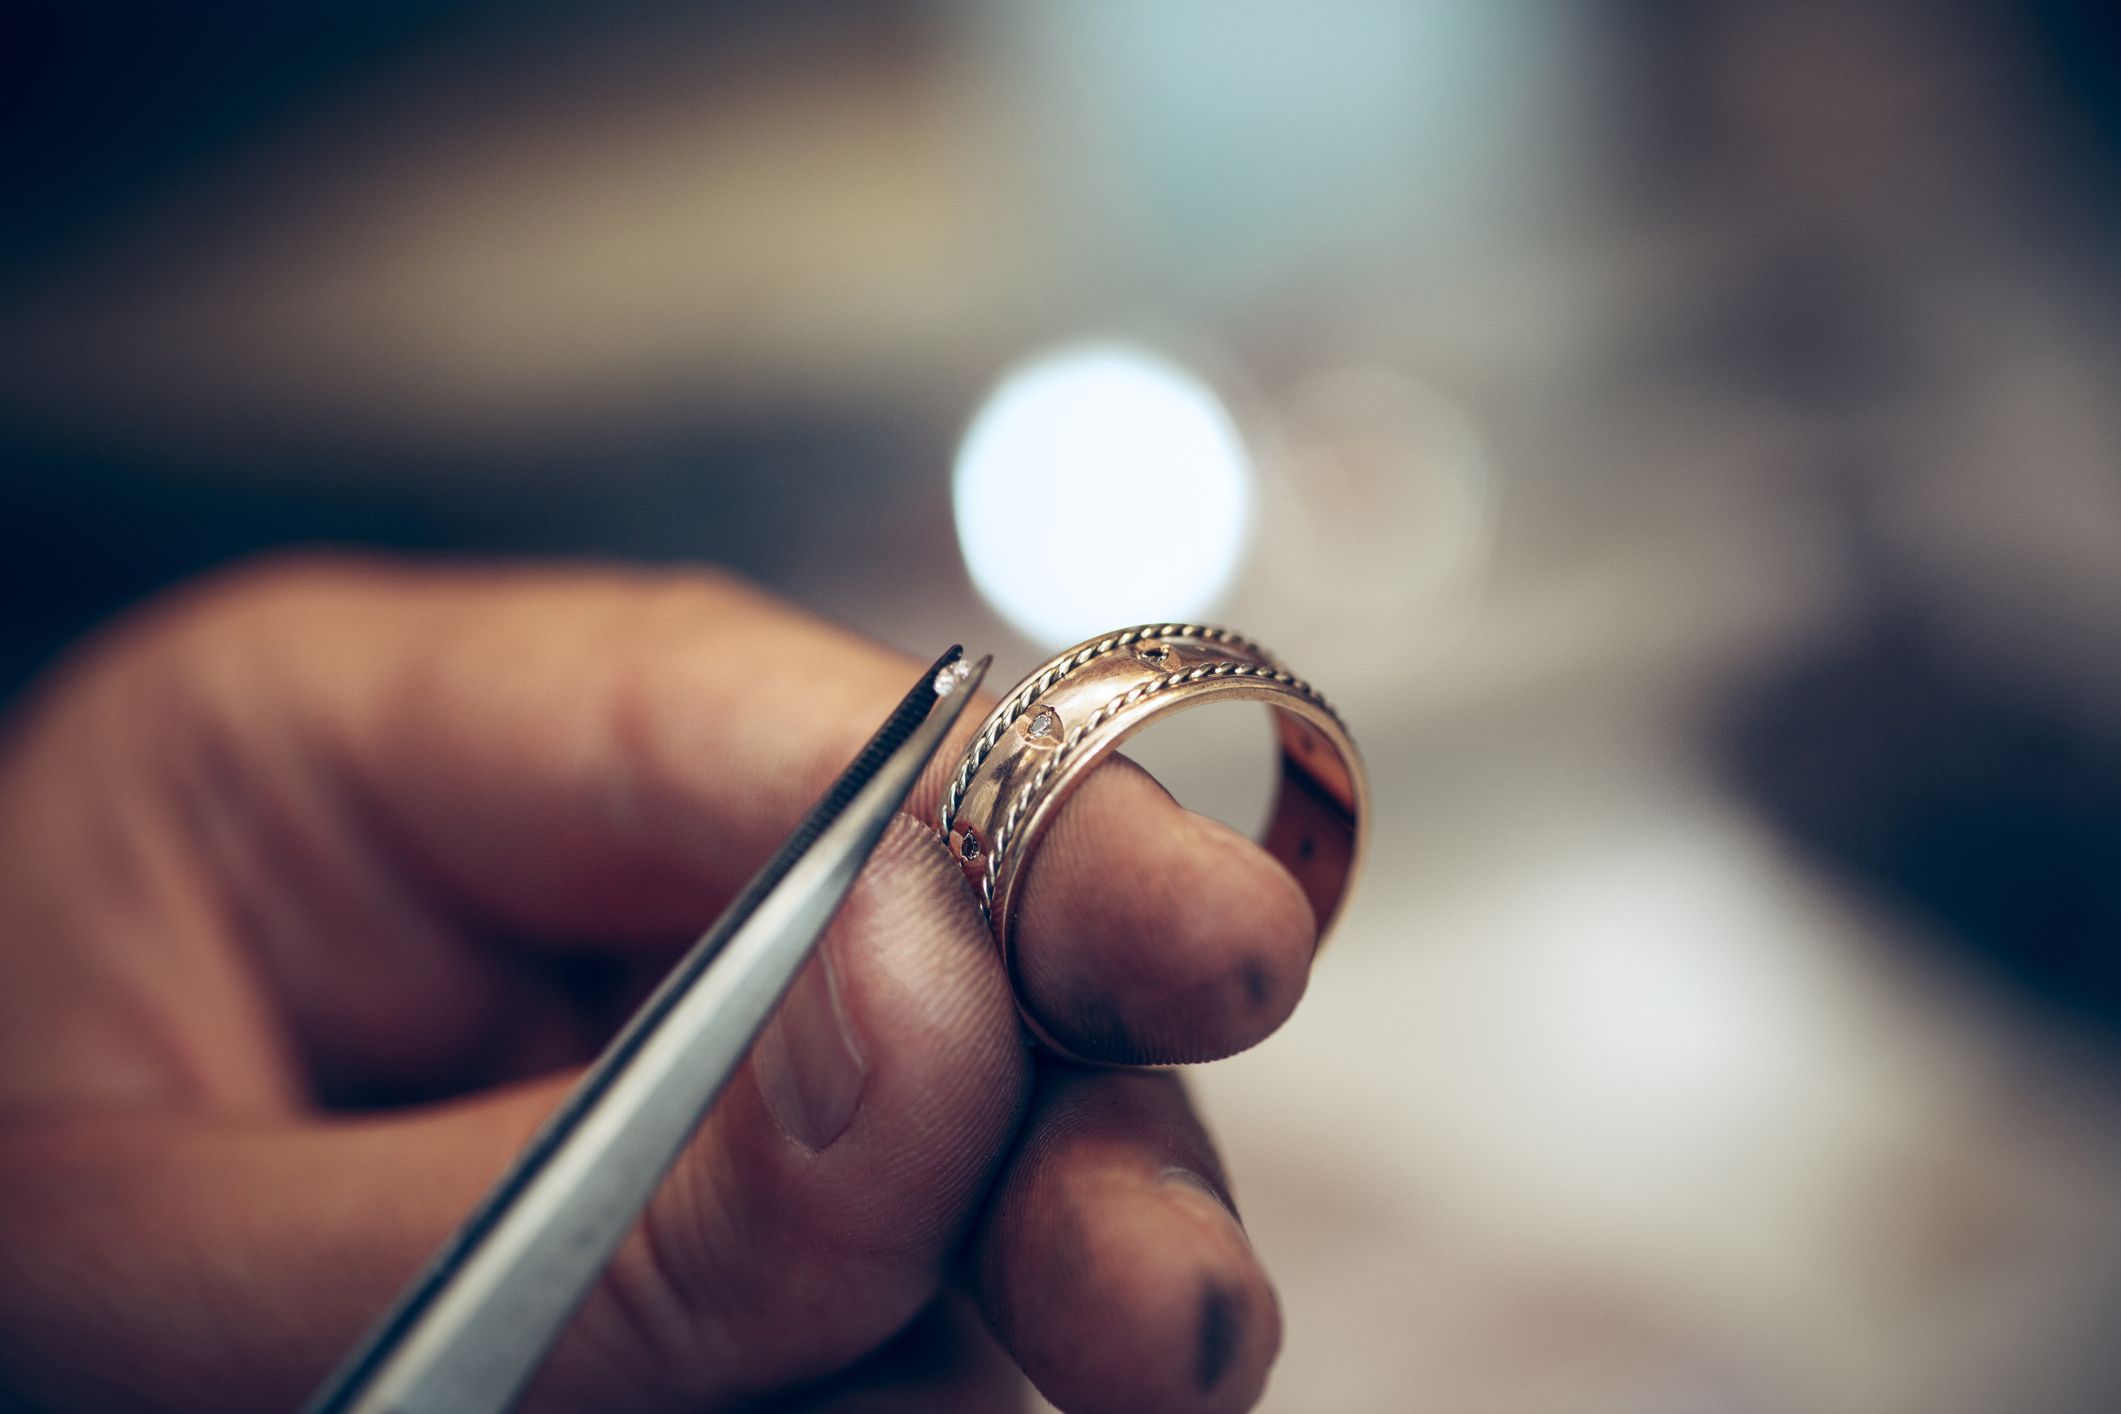 How to make a ring smaller, according to two expert jewellers